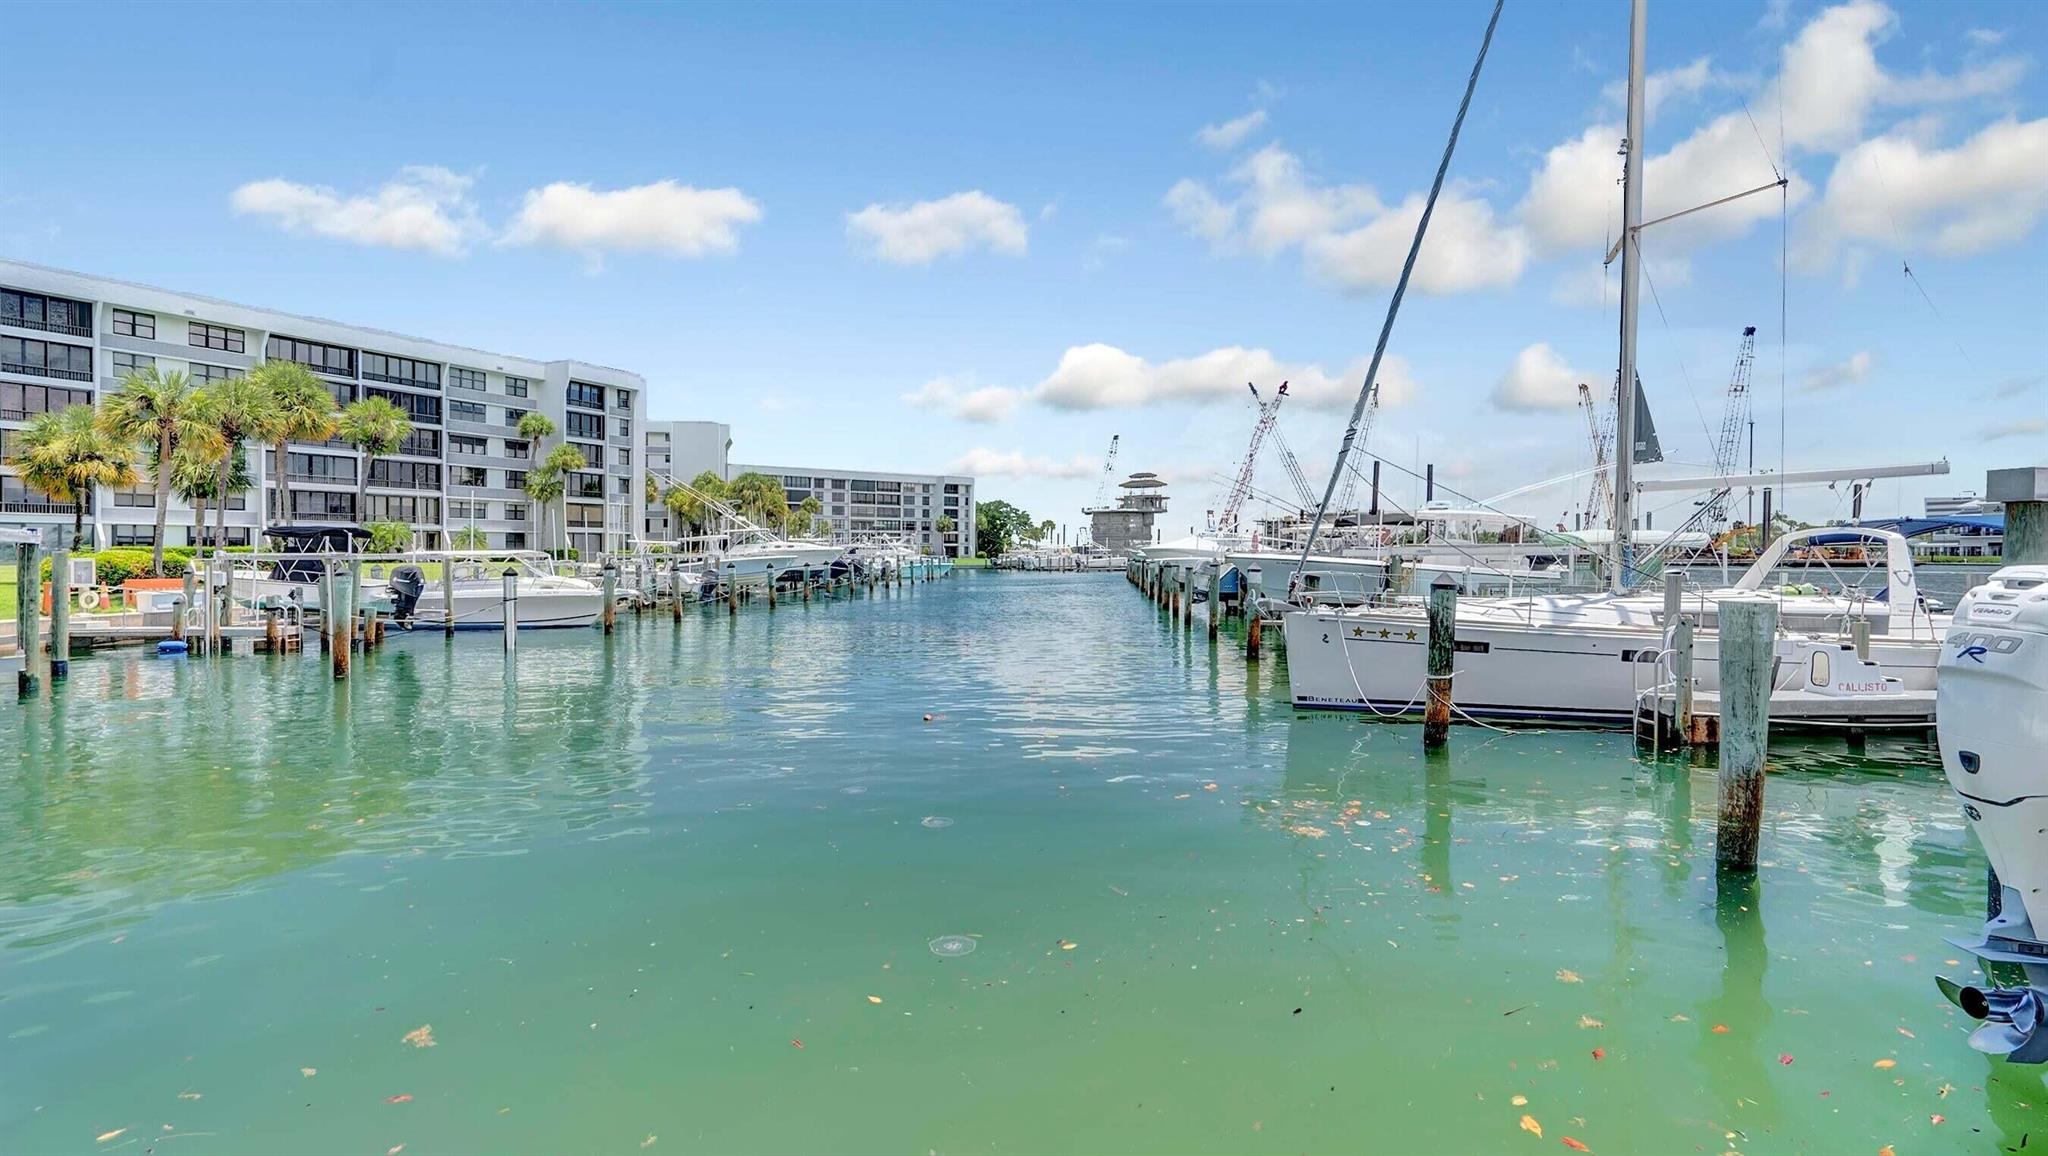 Welcome to the highly desirable Jupiter Cove. Wake up to direct ocean and intracoastal views on one of the best blue waterways Florida has to offer. Located right in the heart of Jupiter and a true boaters paradise lifestyle. This condo is in meticulous condition and is filled with plenty of natural light and views of the intracoastal and ocean. Corner unit with the most square footage in building. Additional den/office can make into a 3rd BR if needed. Very desirable floor plan with southeast exposure. Enjoy the large vessels cruising by throughout the day and the unobstructed wide water views of the blue intracoastal waterways of Jupiter overlooking 1000 North. Jupiter Cove has tennis courts, gym, tiki hut for grilling, kayaking, endless entertainment, and so much more.